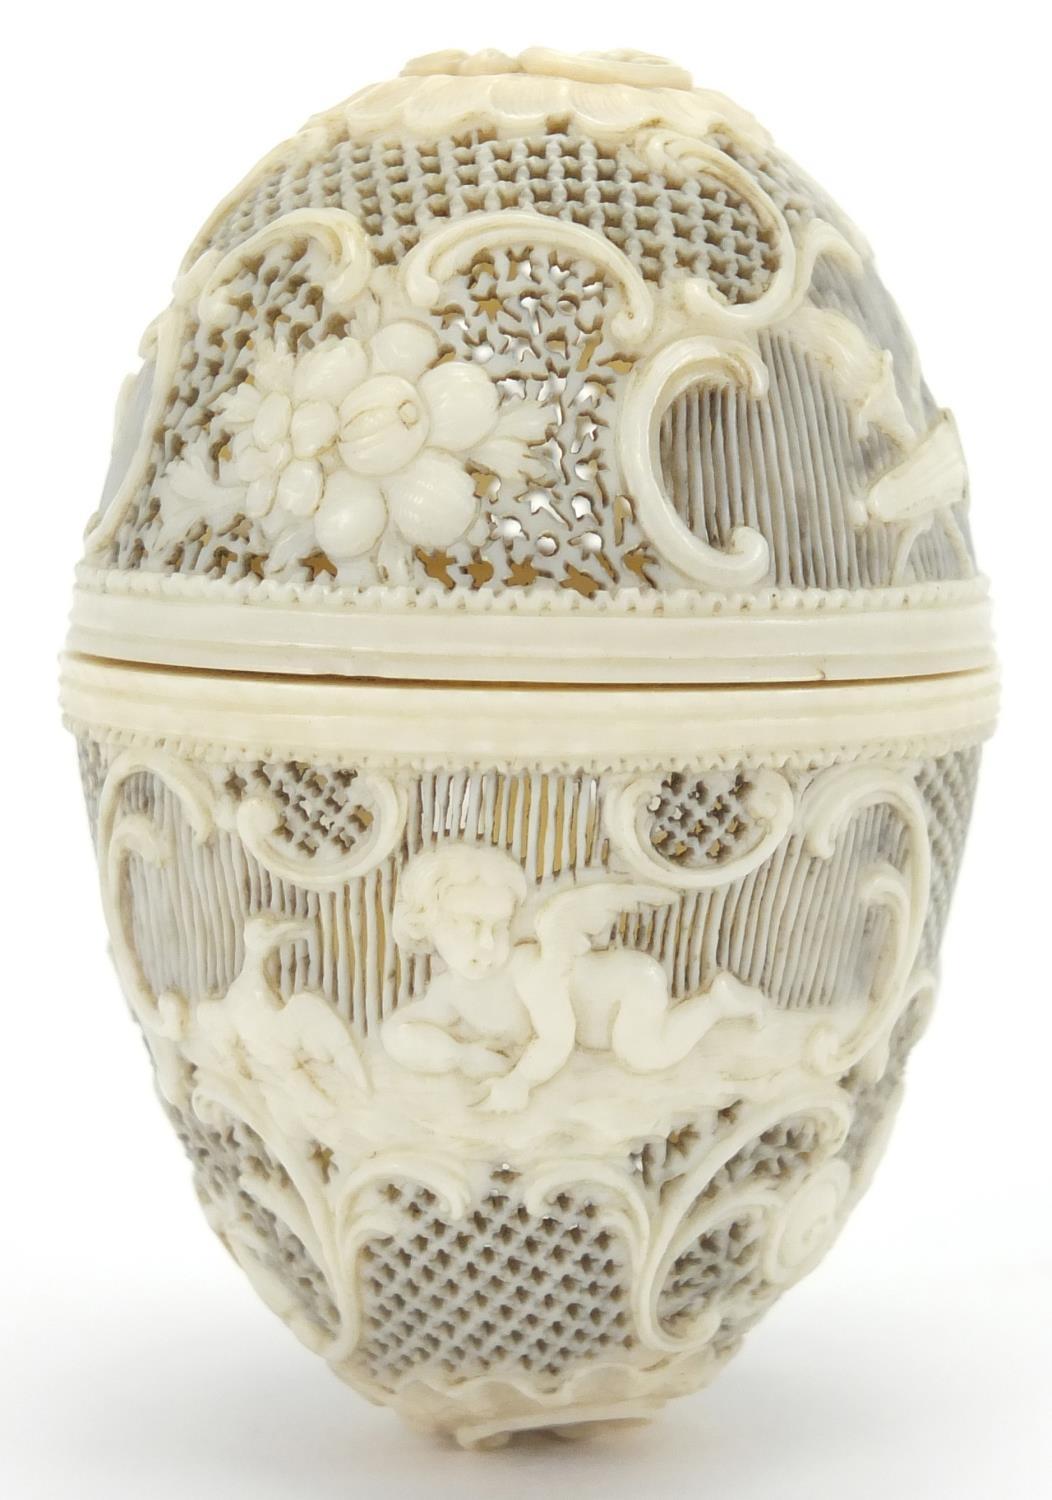 19th century European ivory trinket, finely pierced and carved with Cupids and flowers amongst C